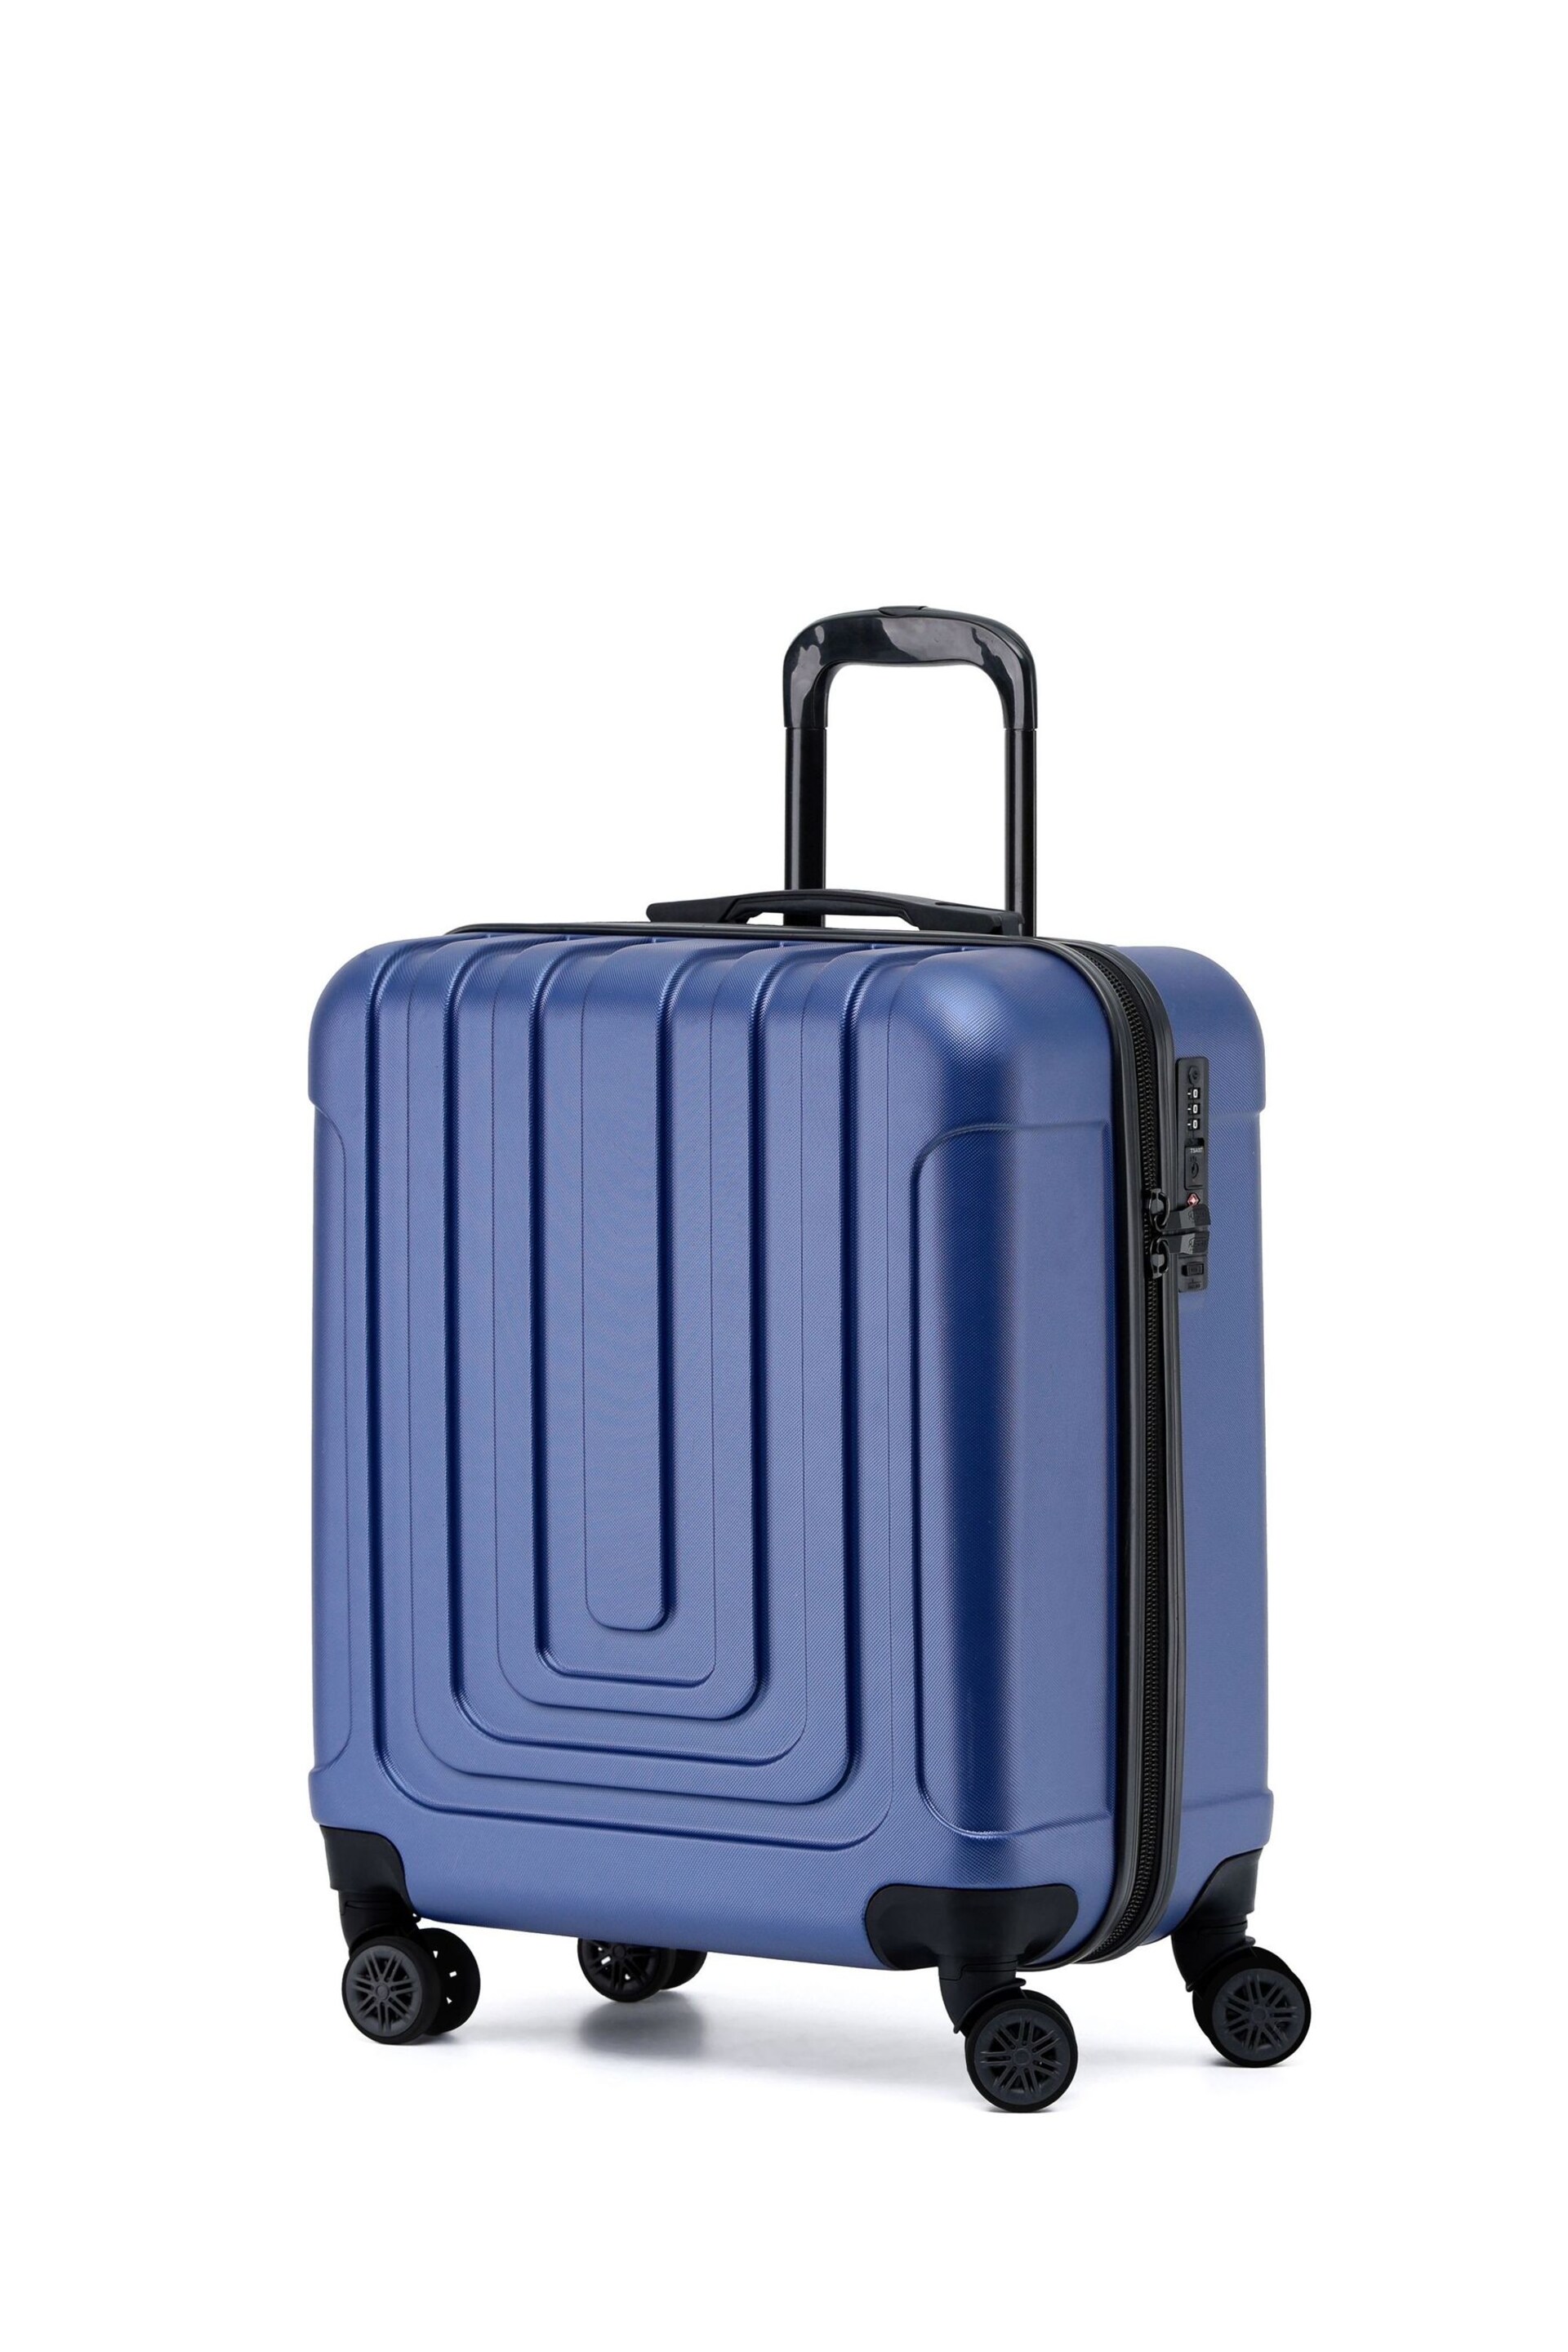 Flight Knight 56x45x25cm EasyJet Overhead 8 Wheel ABS Hard Case Cabin Carry On Hand Black Luggage - Image 1 of 7